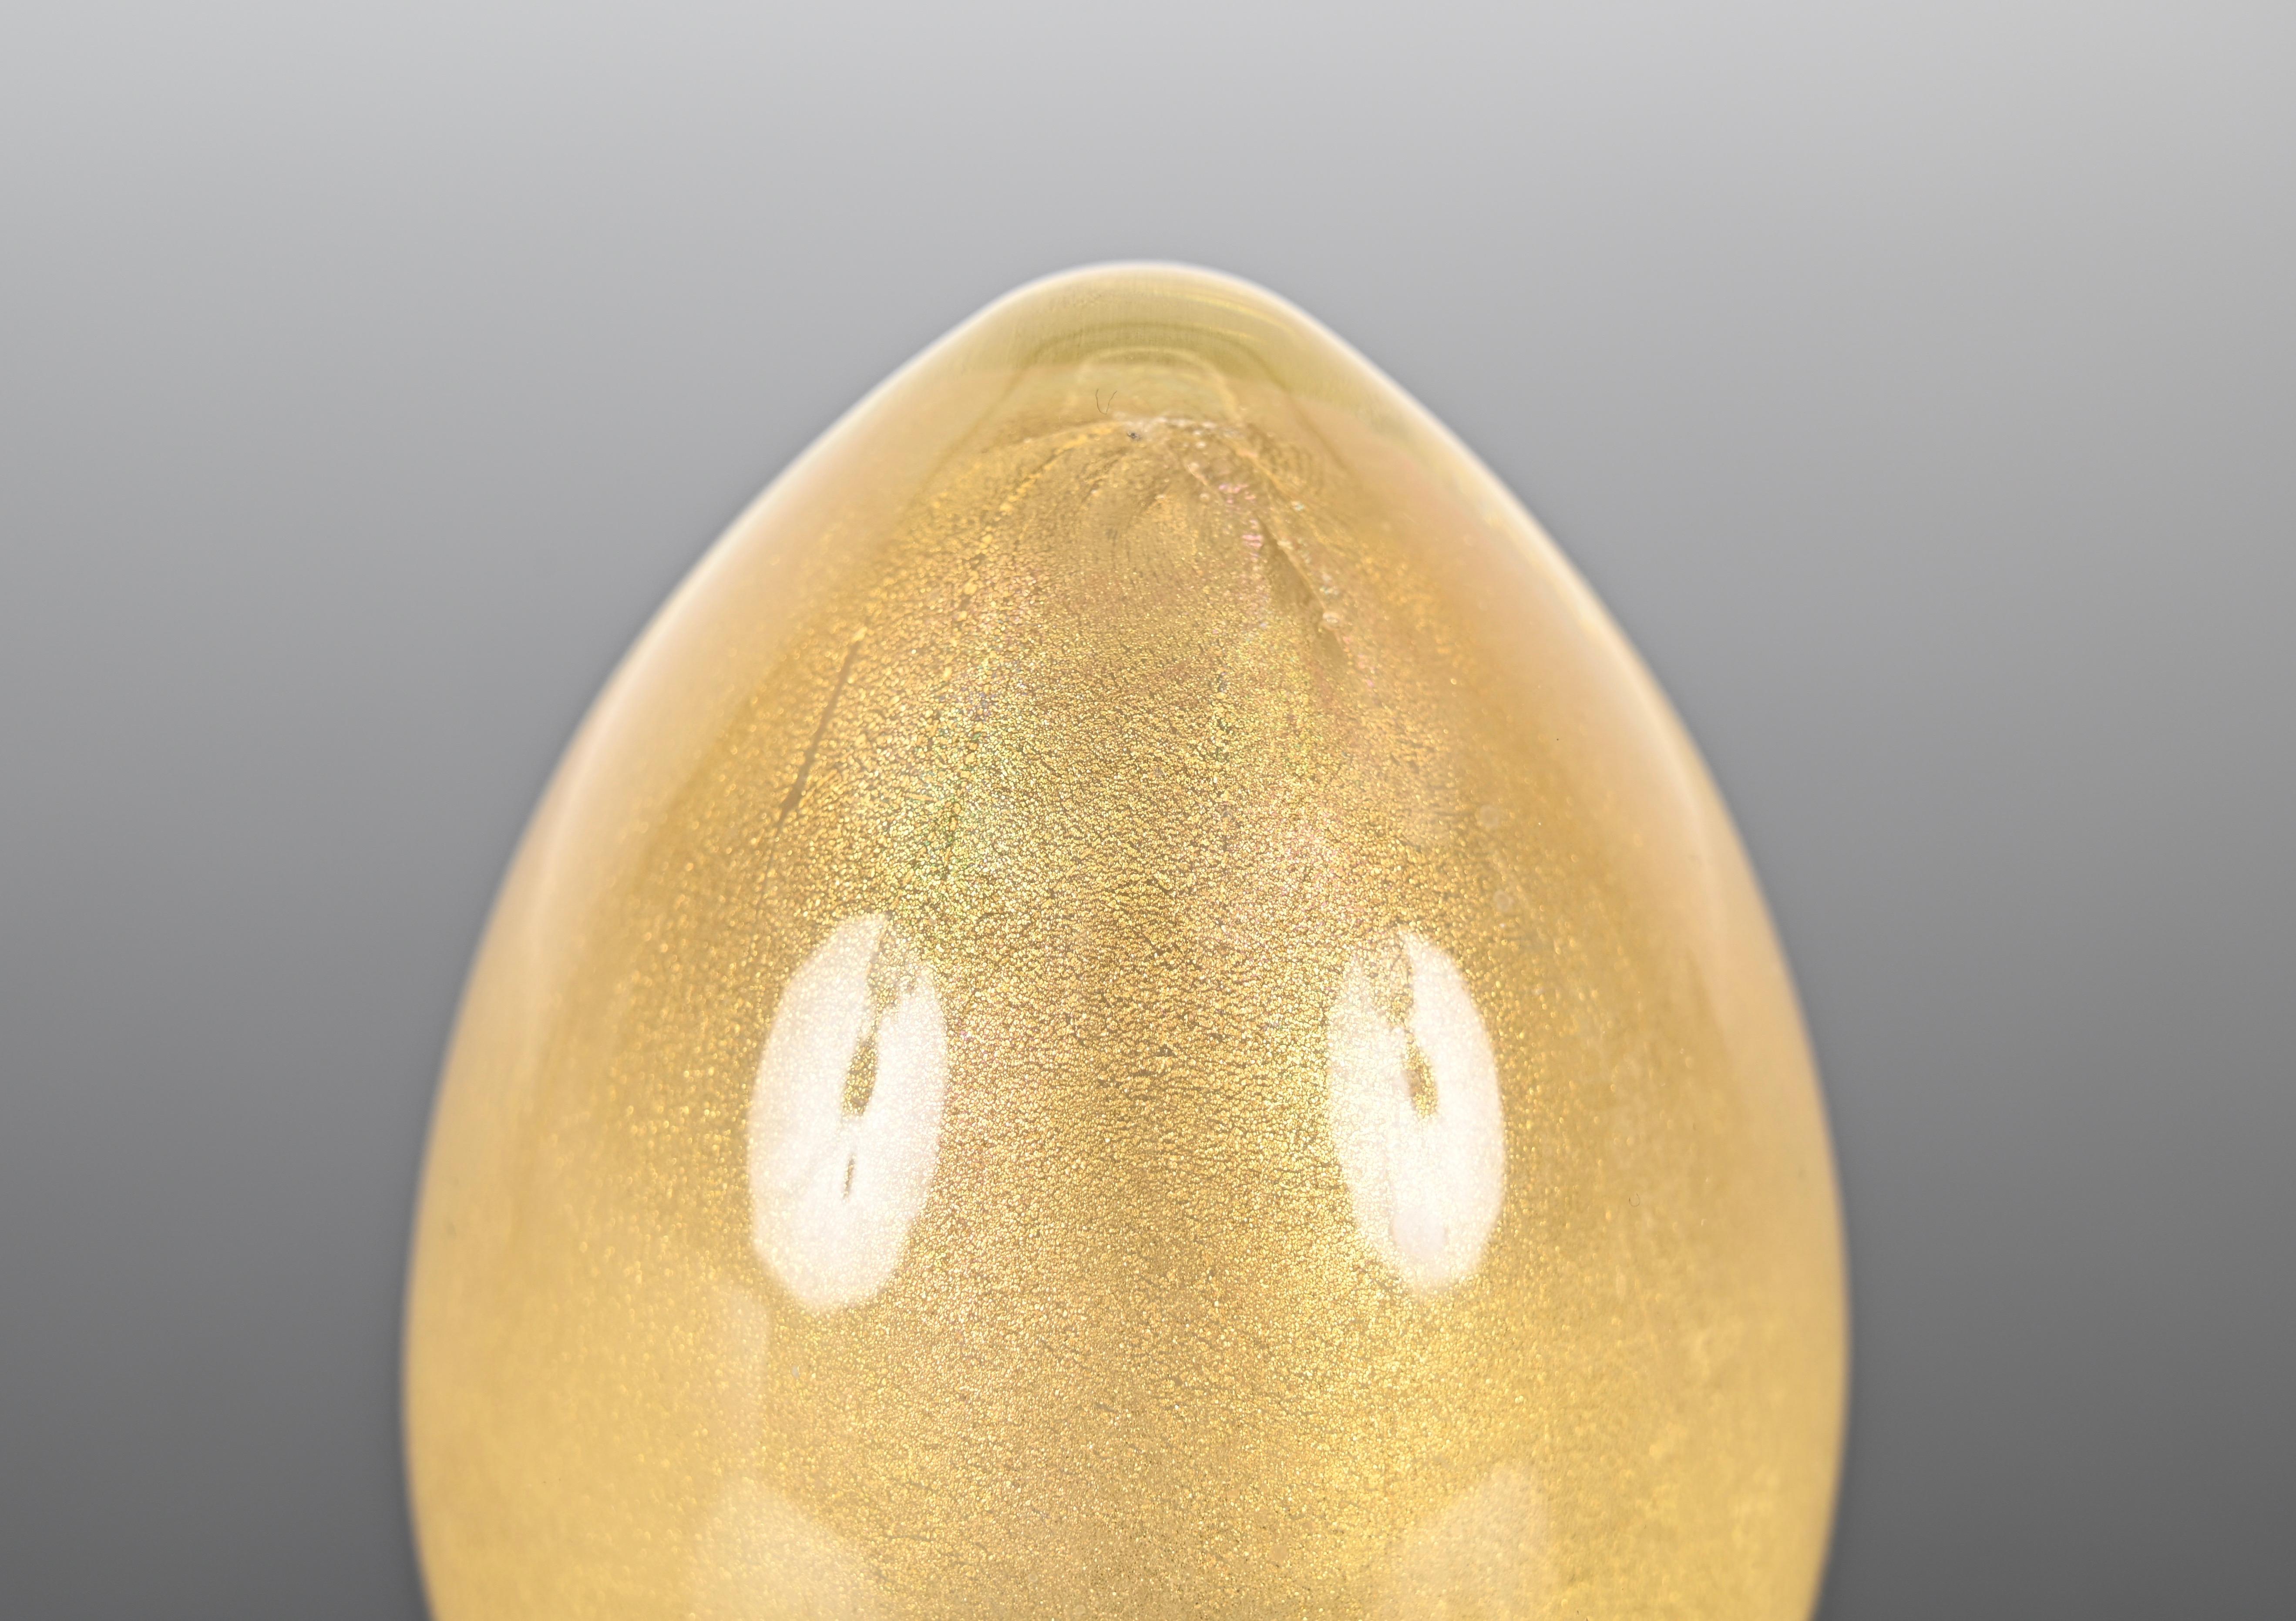 Mid-Century Modern Seguso Murano Egg Paperweight in Murano Glass with Gold Dust, Italy 1950s For Sale